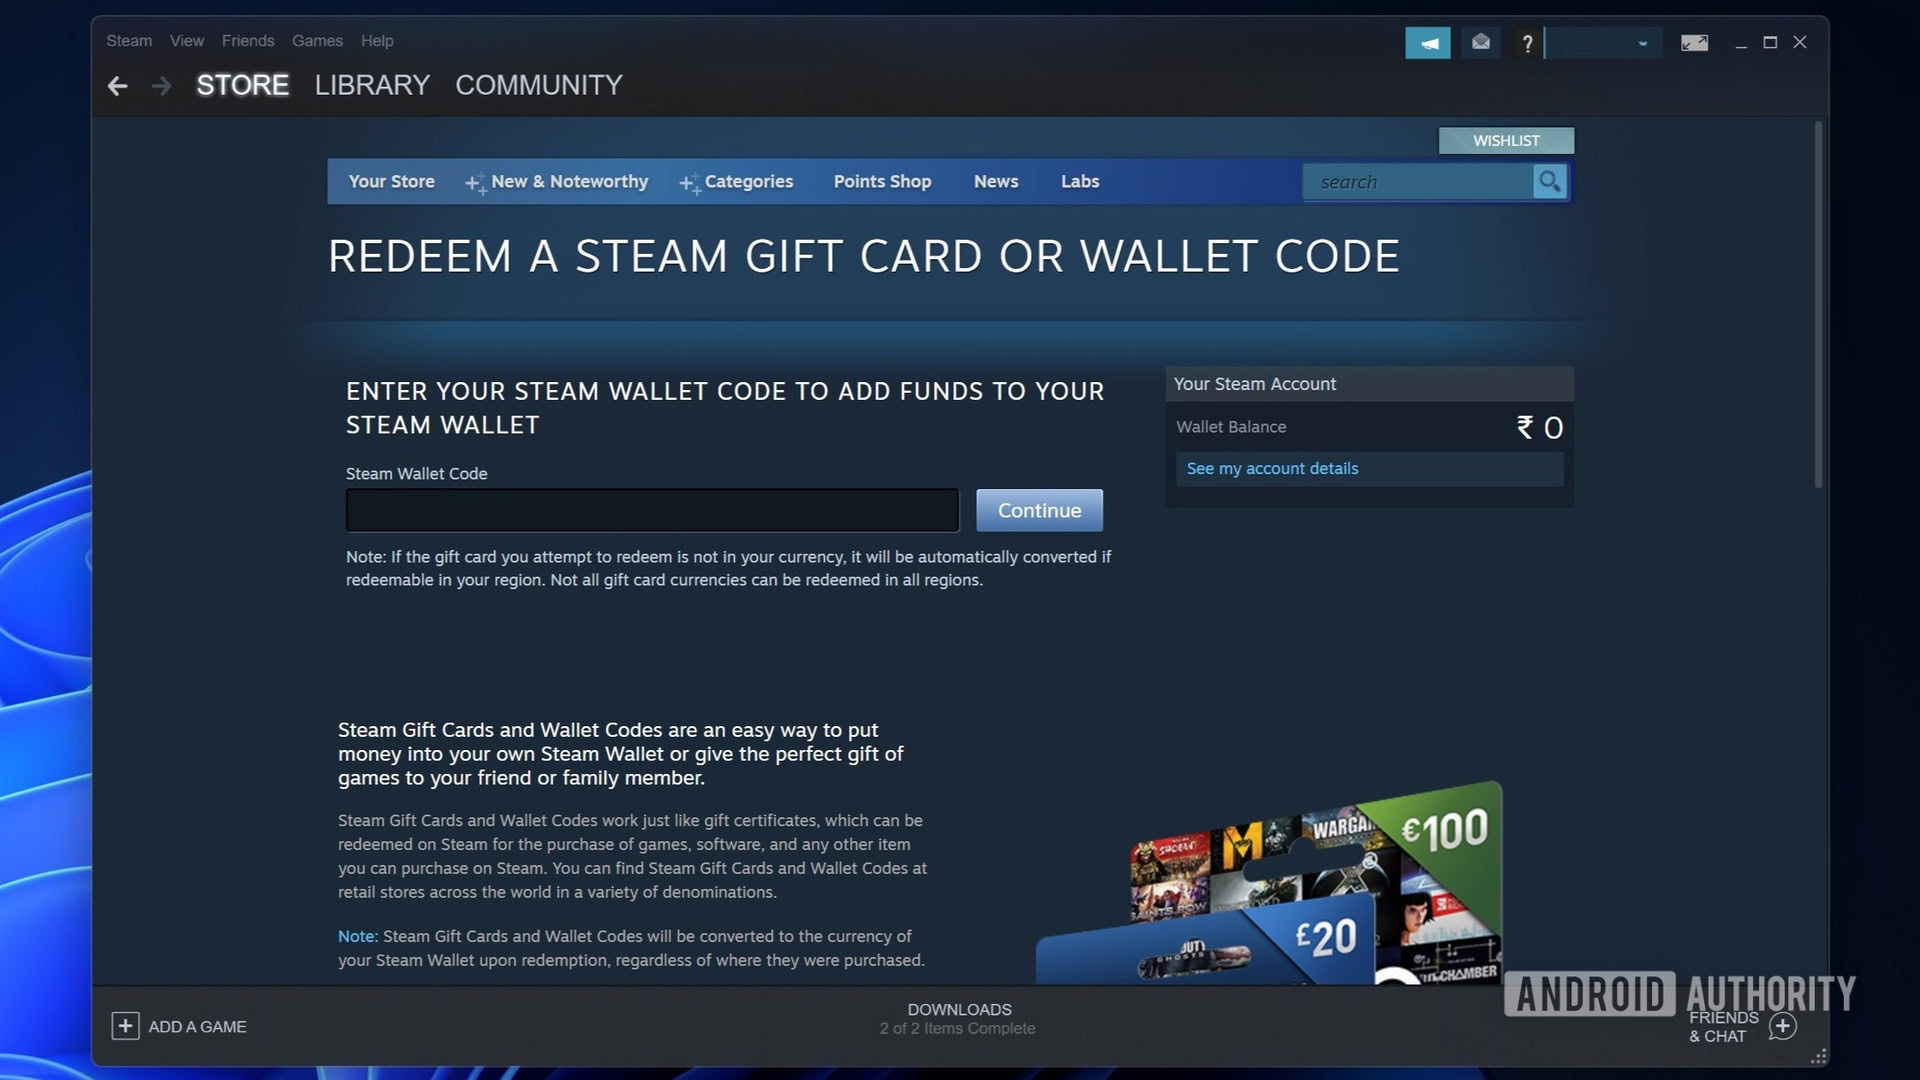 Steam $60.00 Physical Gift Cards (3 pack of $20.00 Cards), Valve